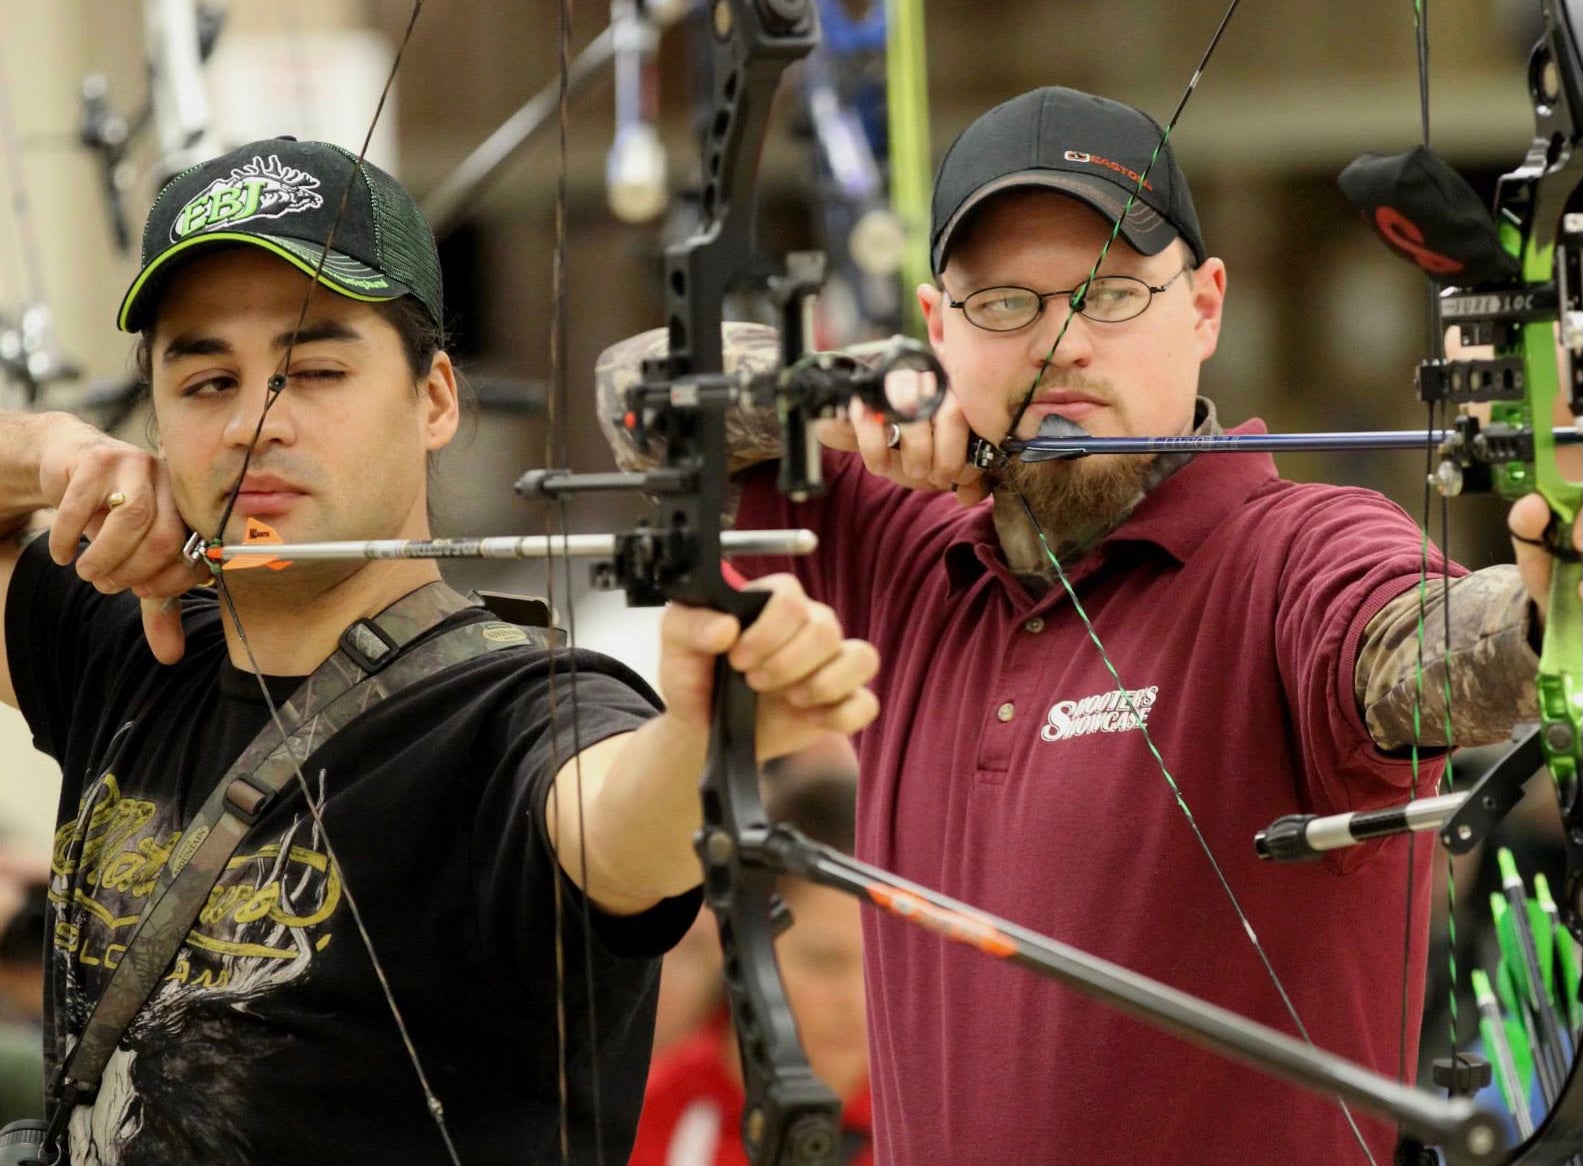 8 Reasons to Join an Indoor Archery League